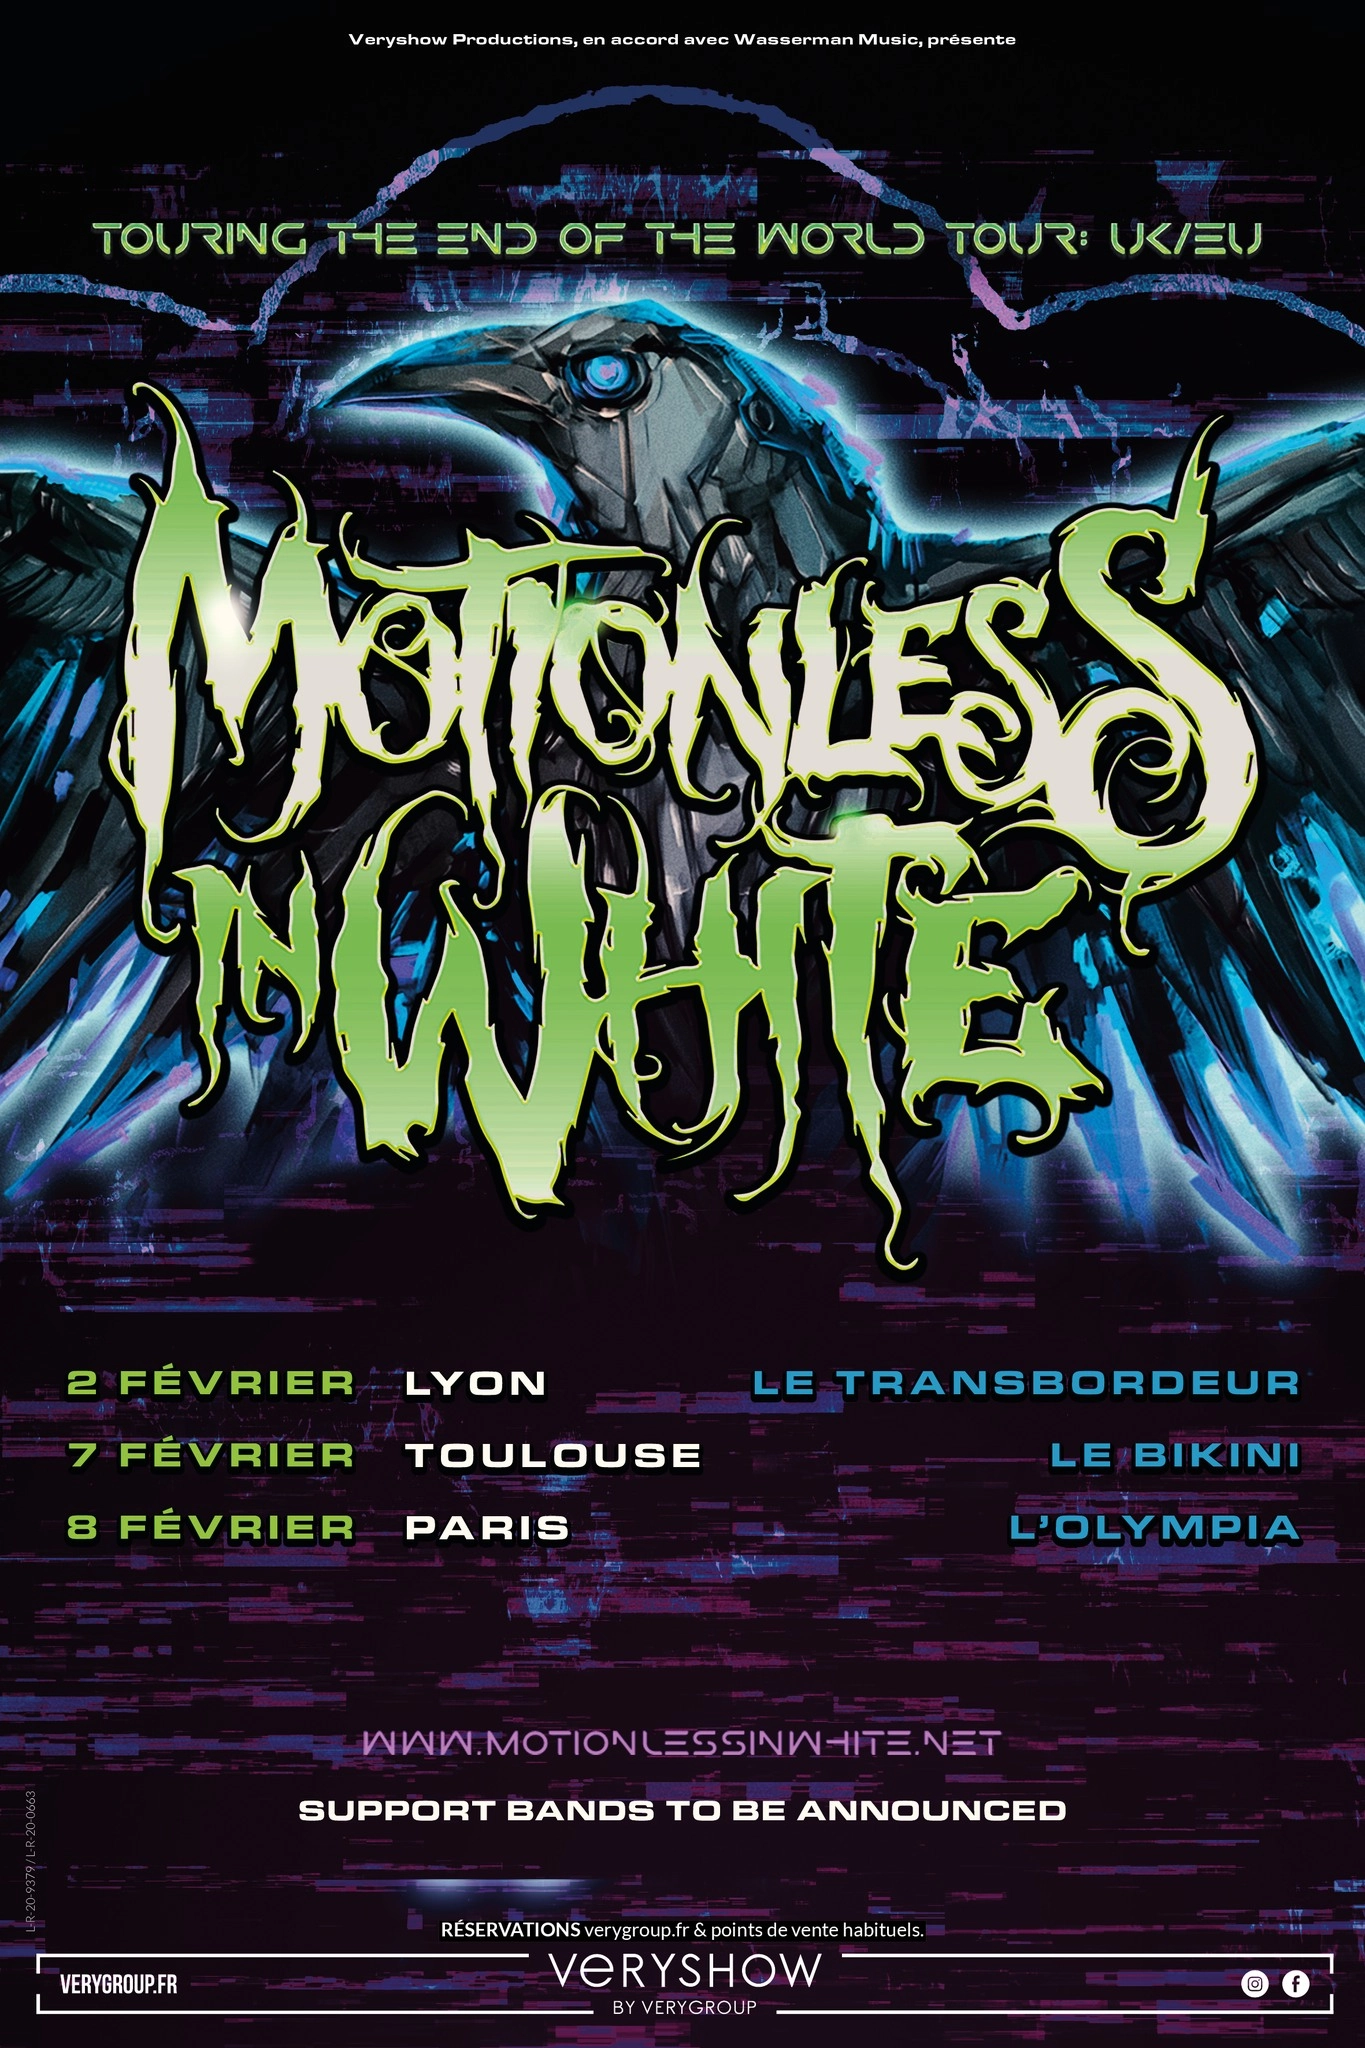 Motionless In White at Le Transbordeur Tickets